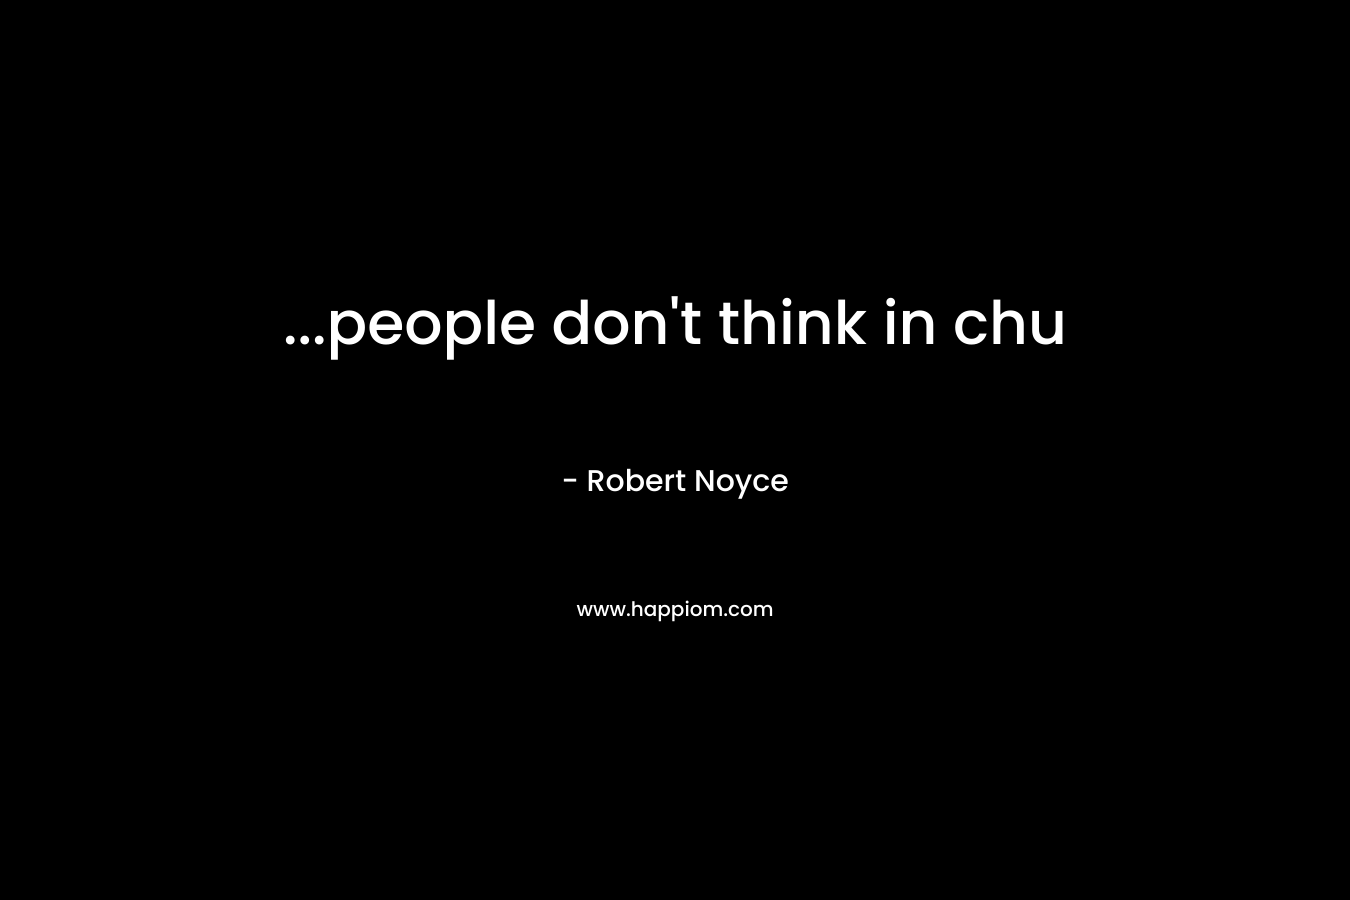 ...people don't think in chu